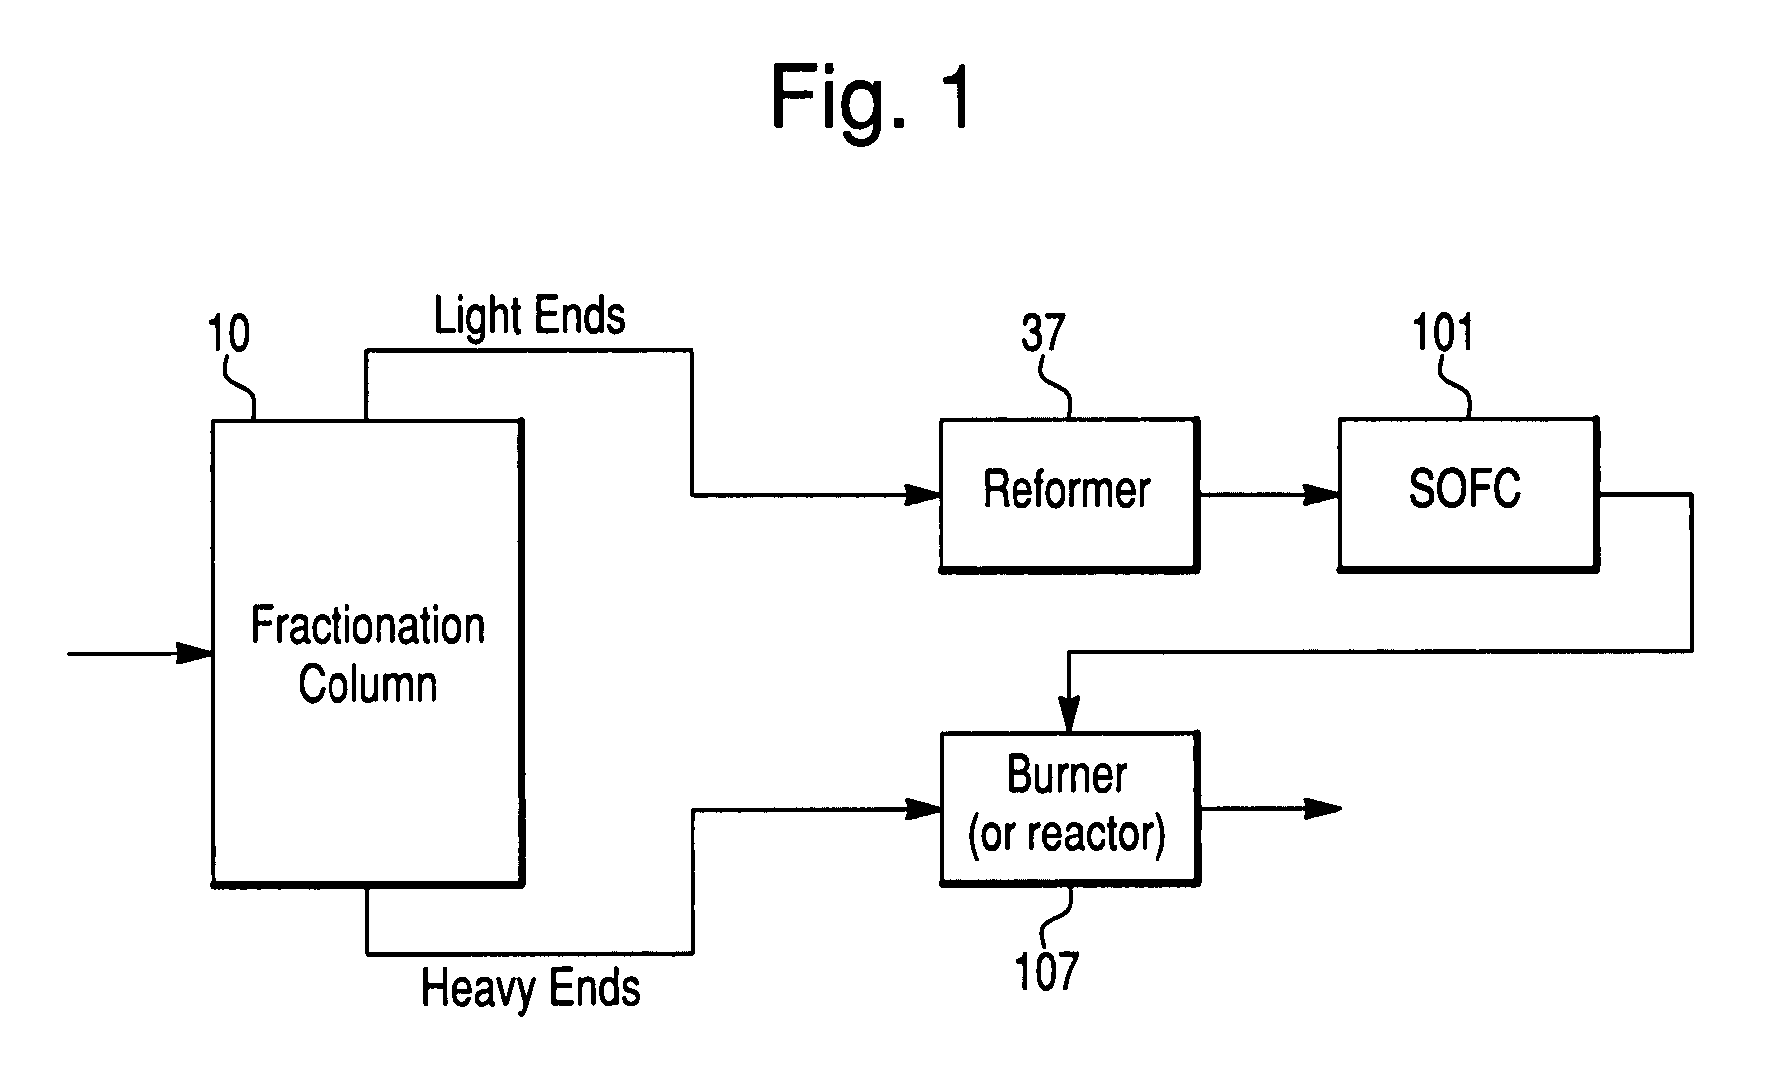 Flexible fuel cell system configuration to handle multiple fuels